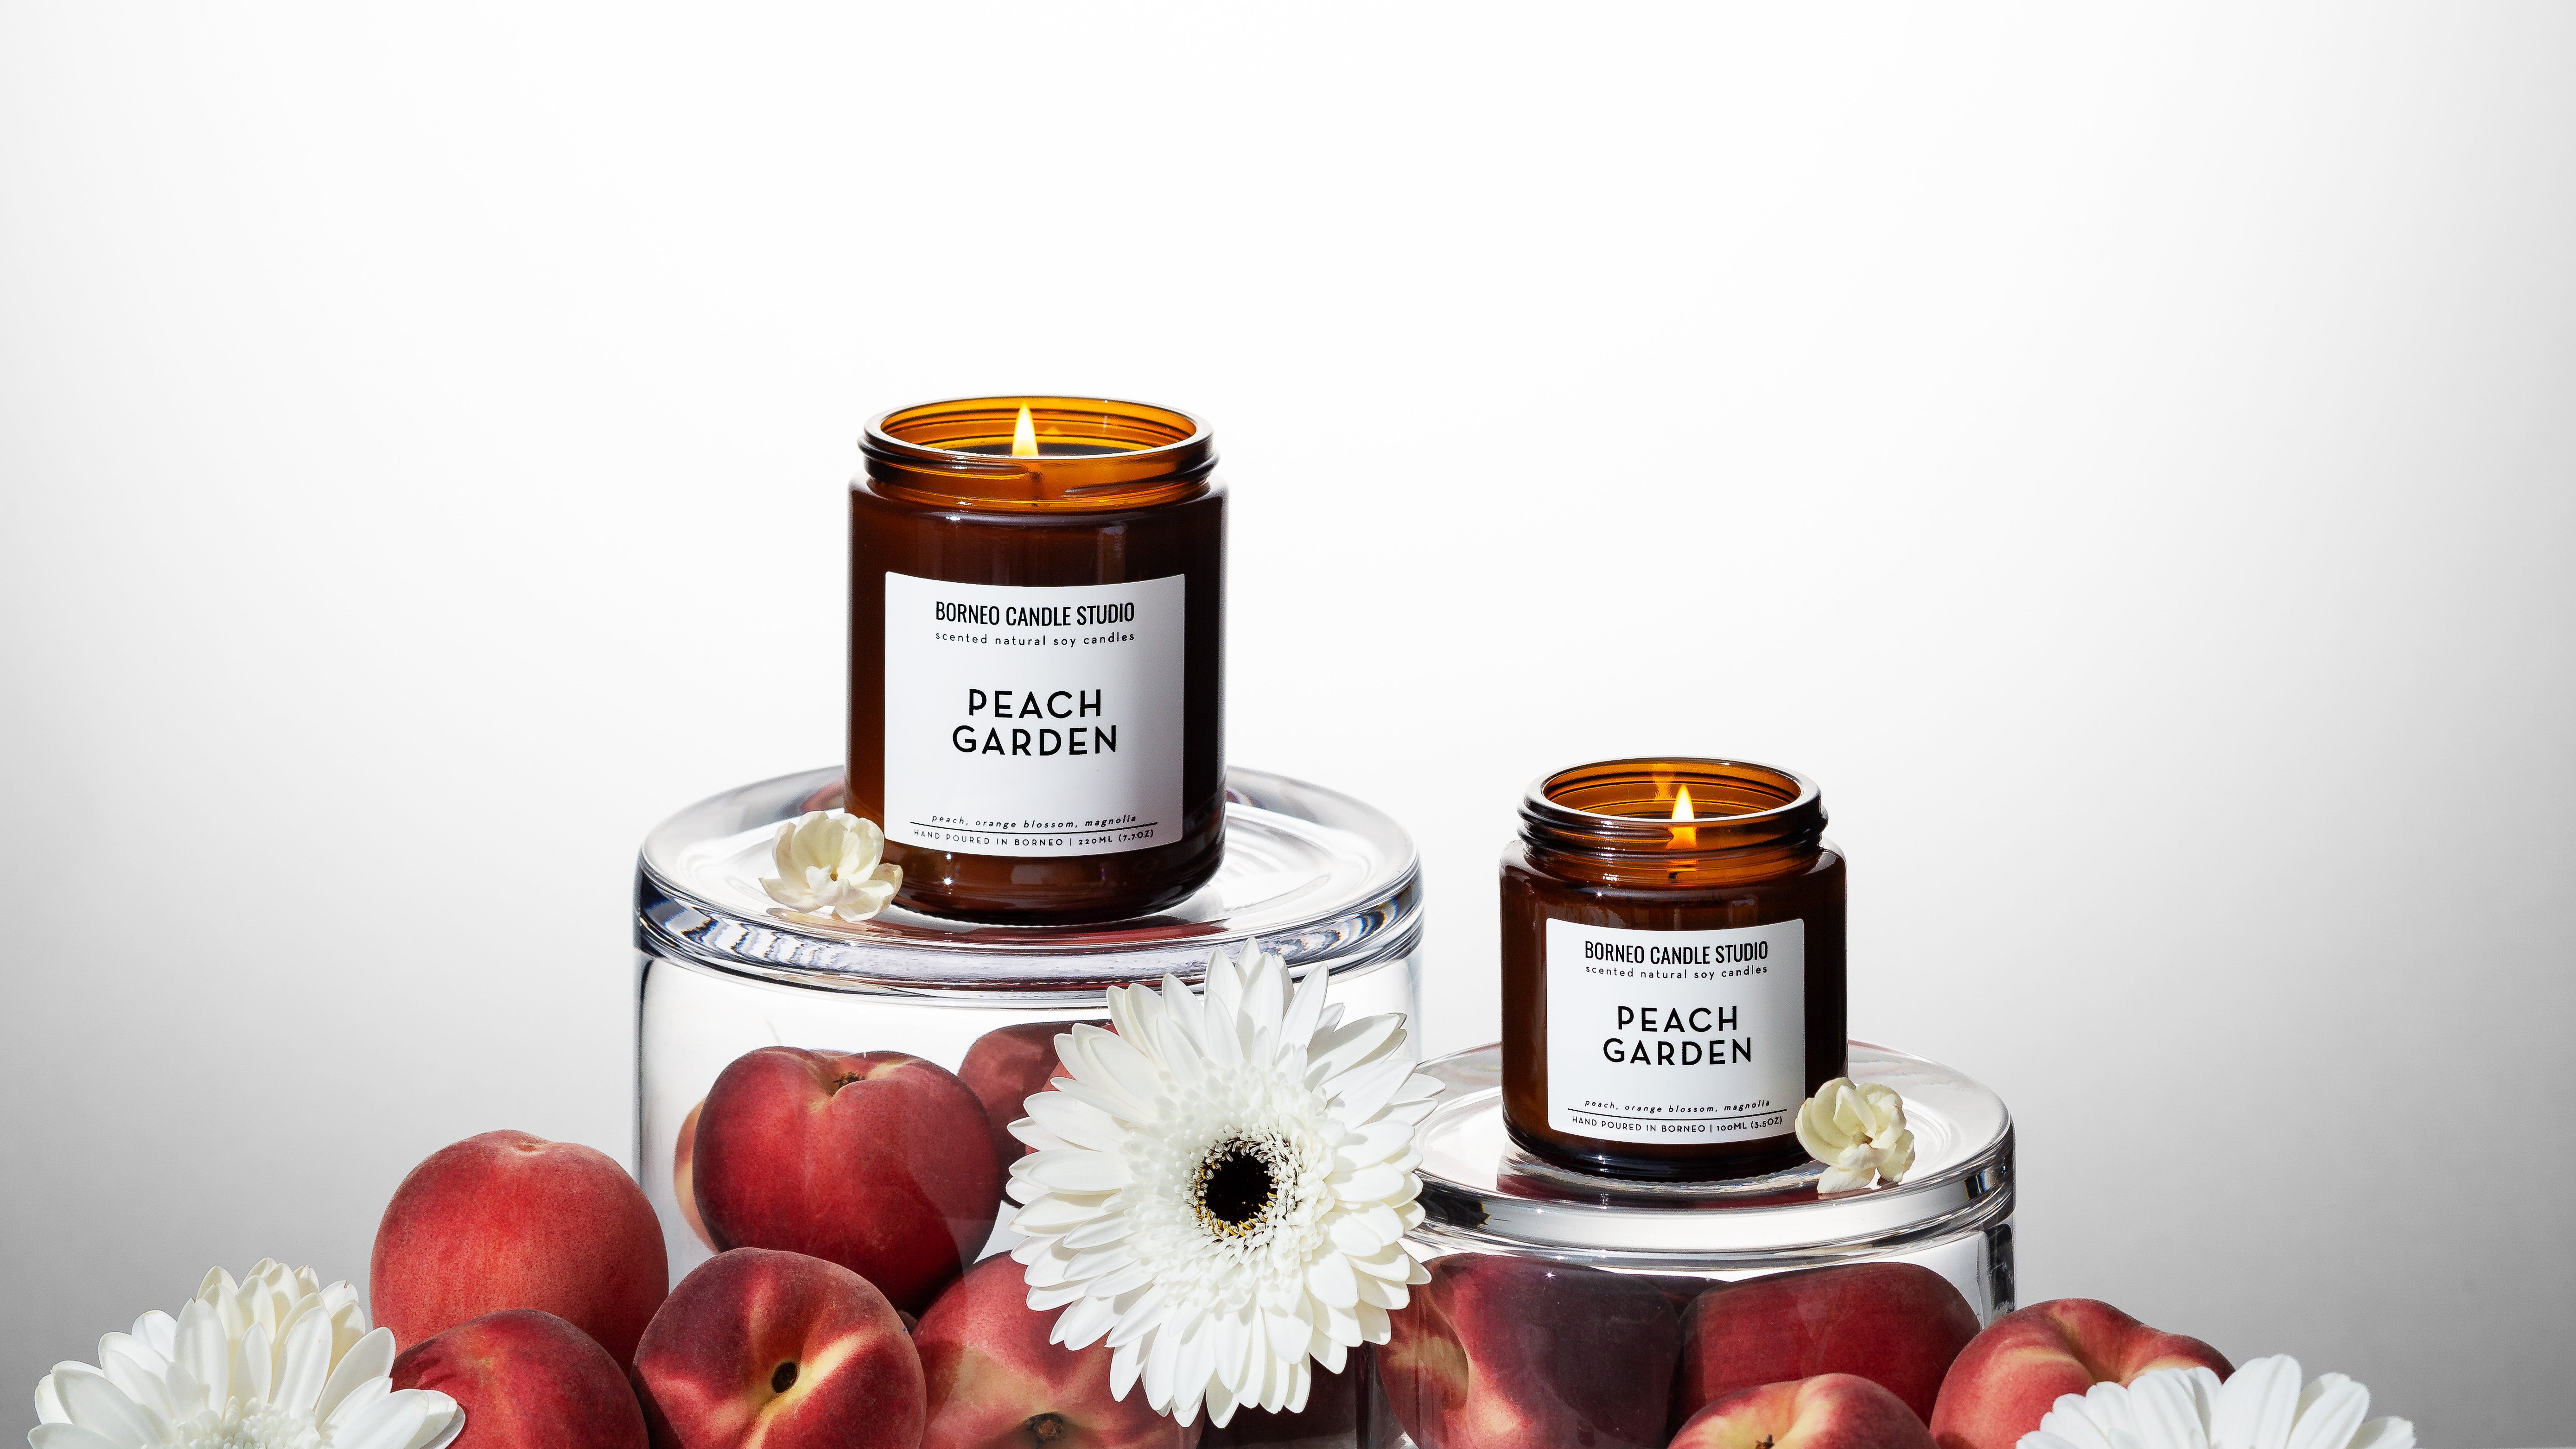 Peach Garden Scented Candle Brunei - A Fruity & Floral Candle